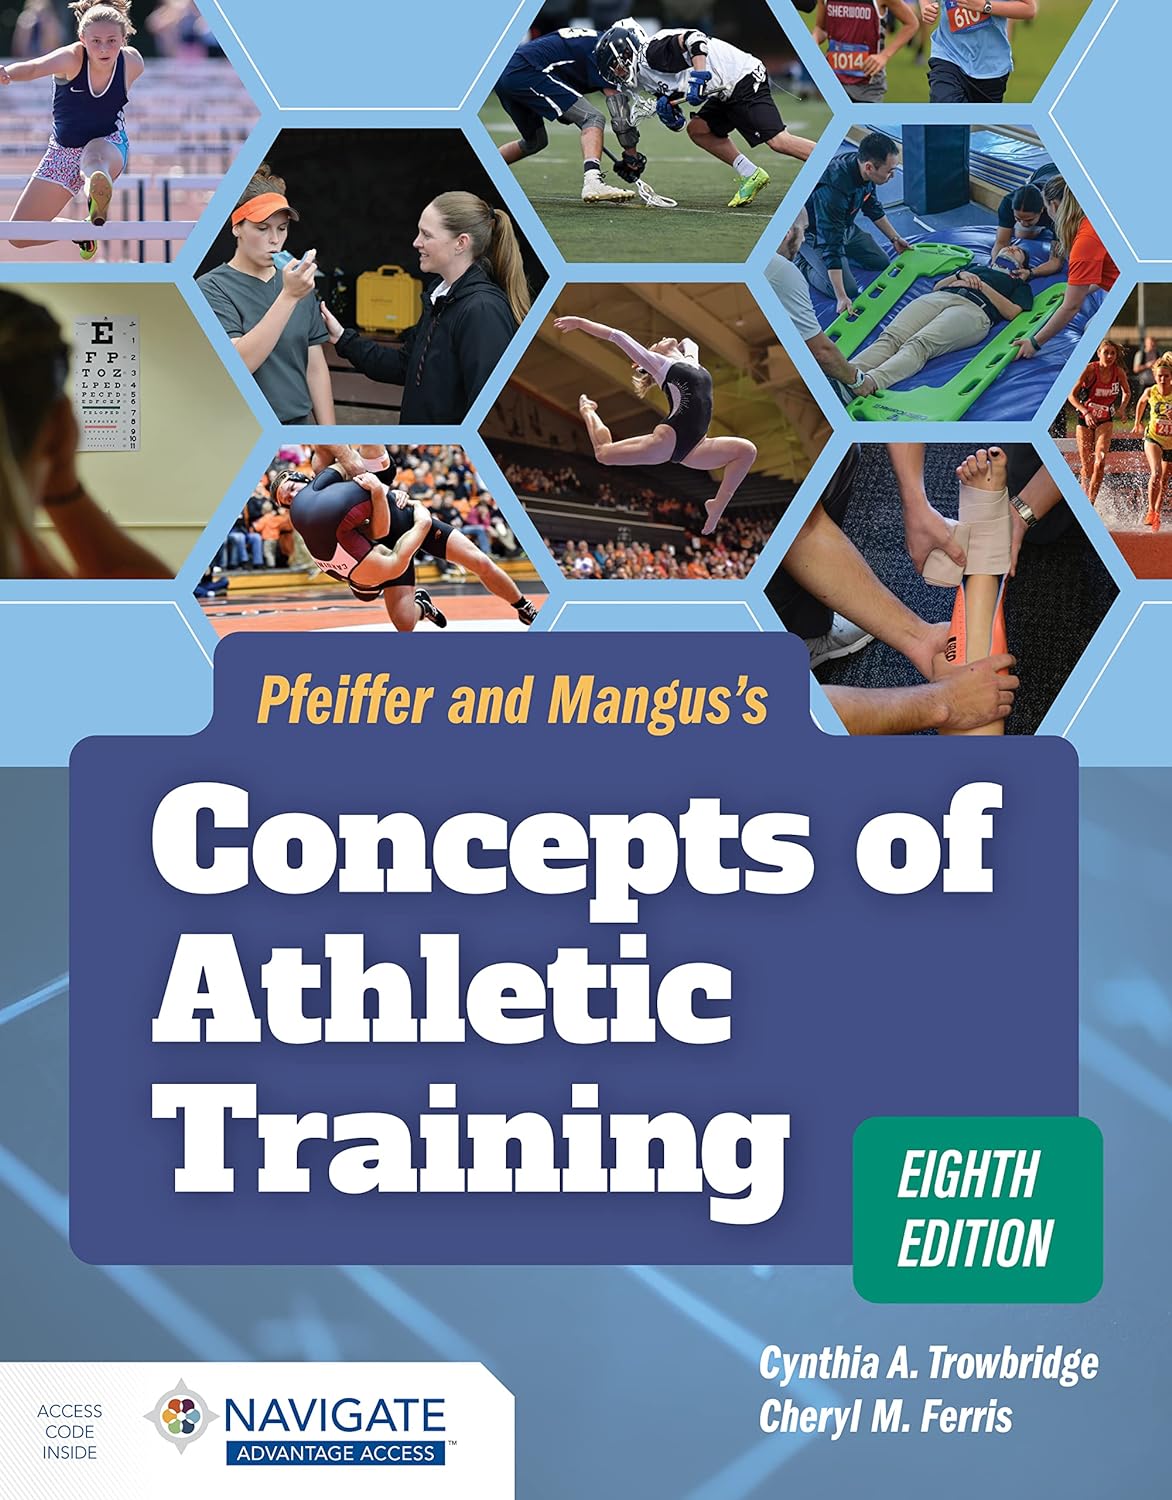 Pfeiffer and Mangus s Concepts of Athletic Training, 8th Edition  by Cynthia Trowbridge